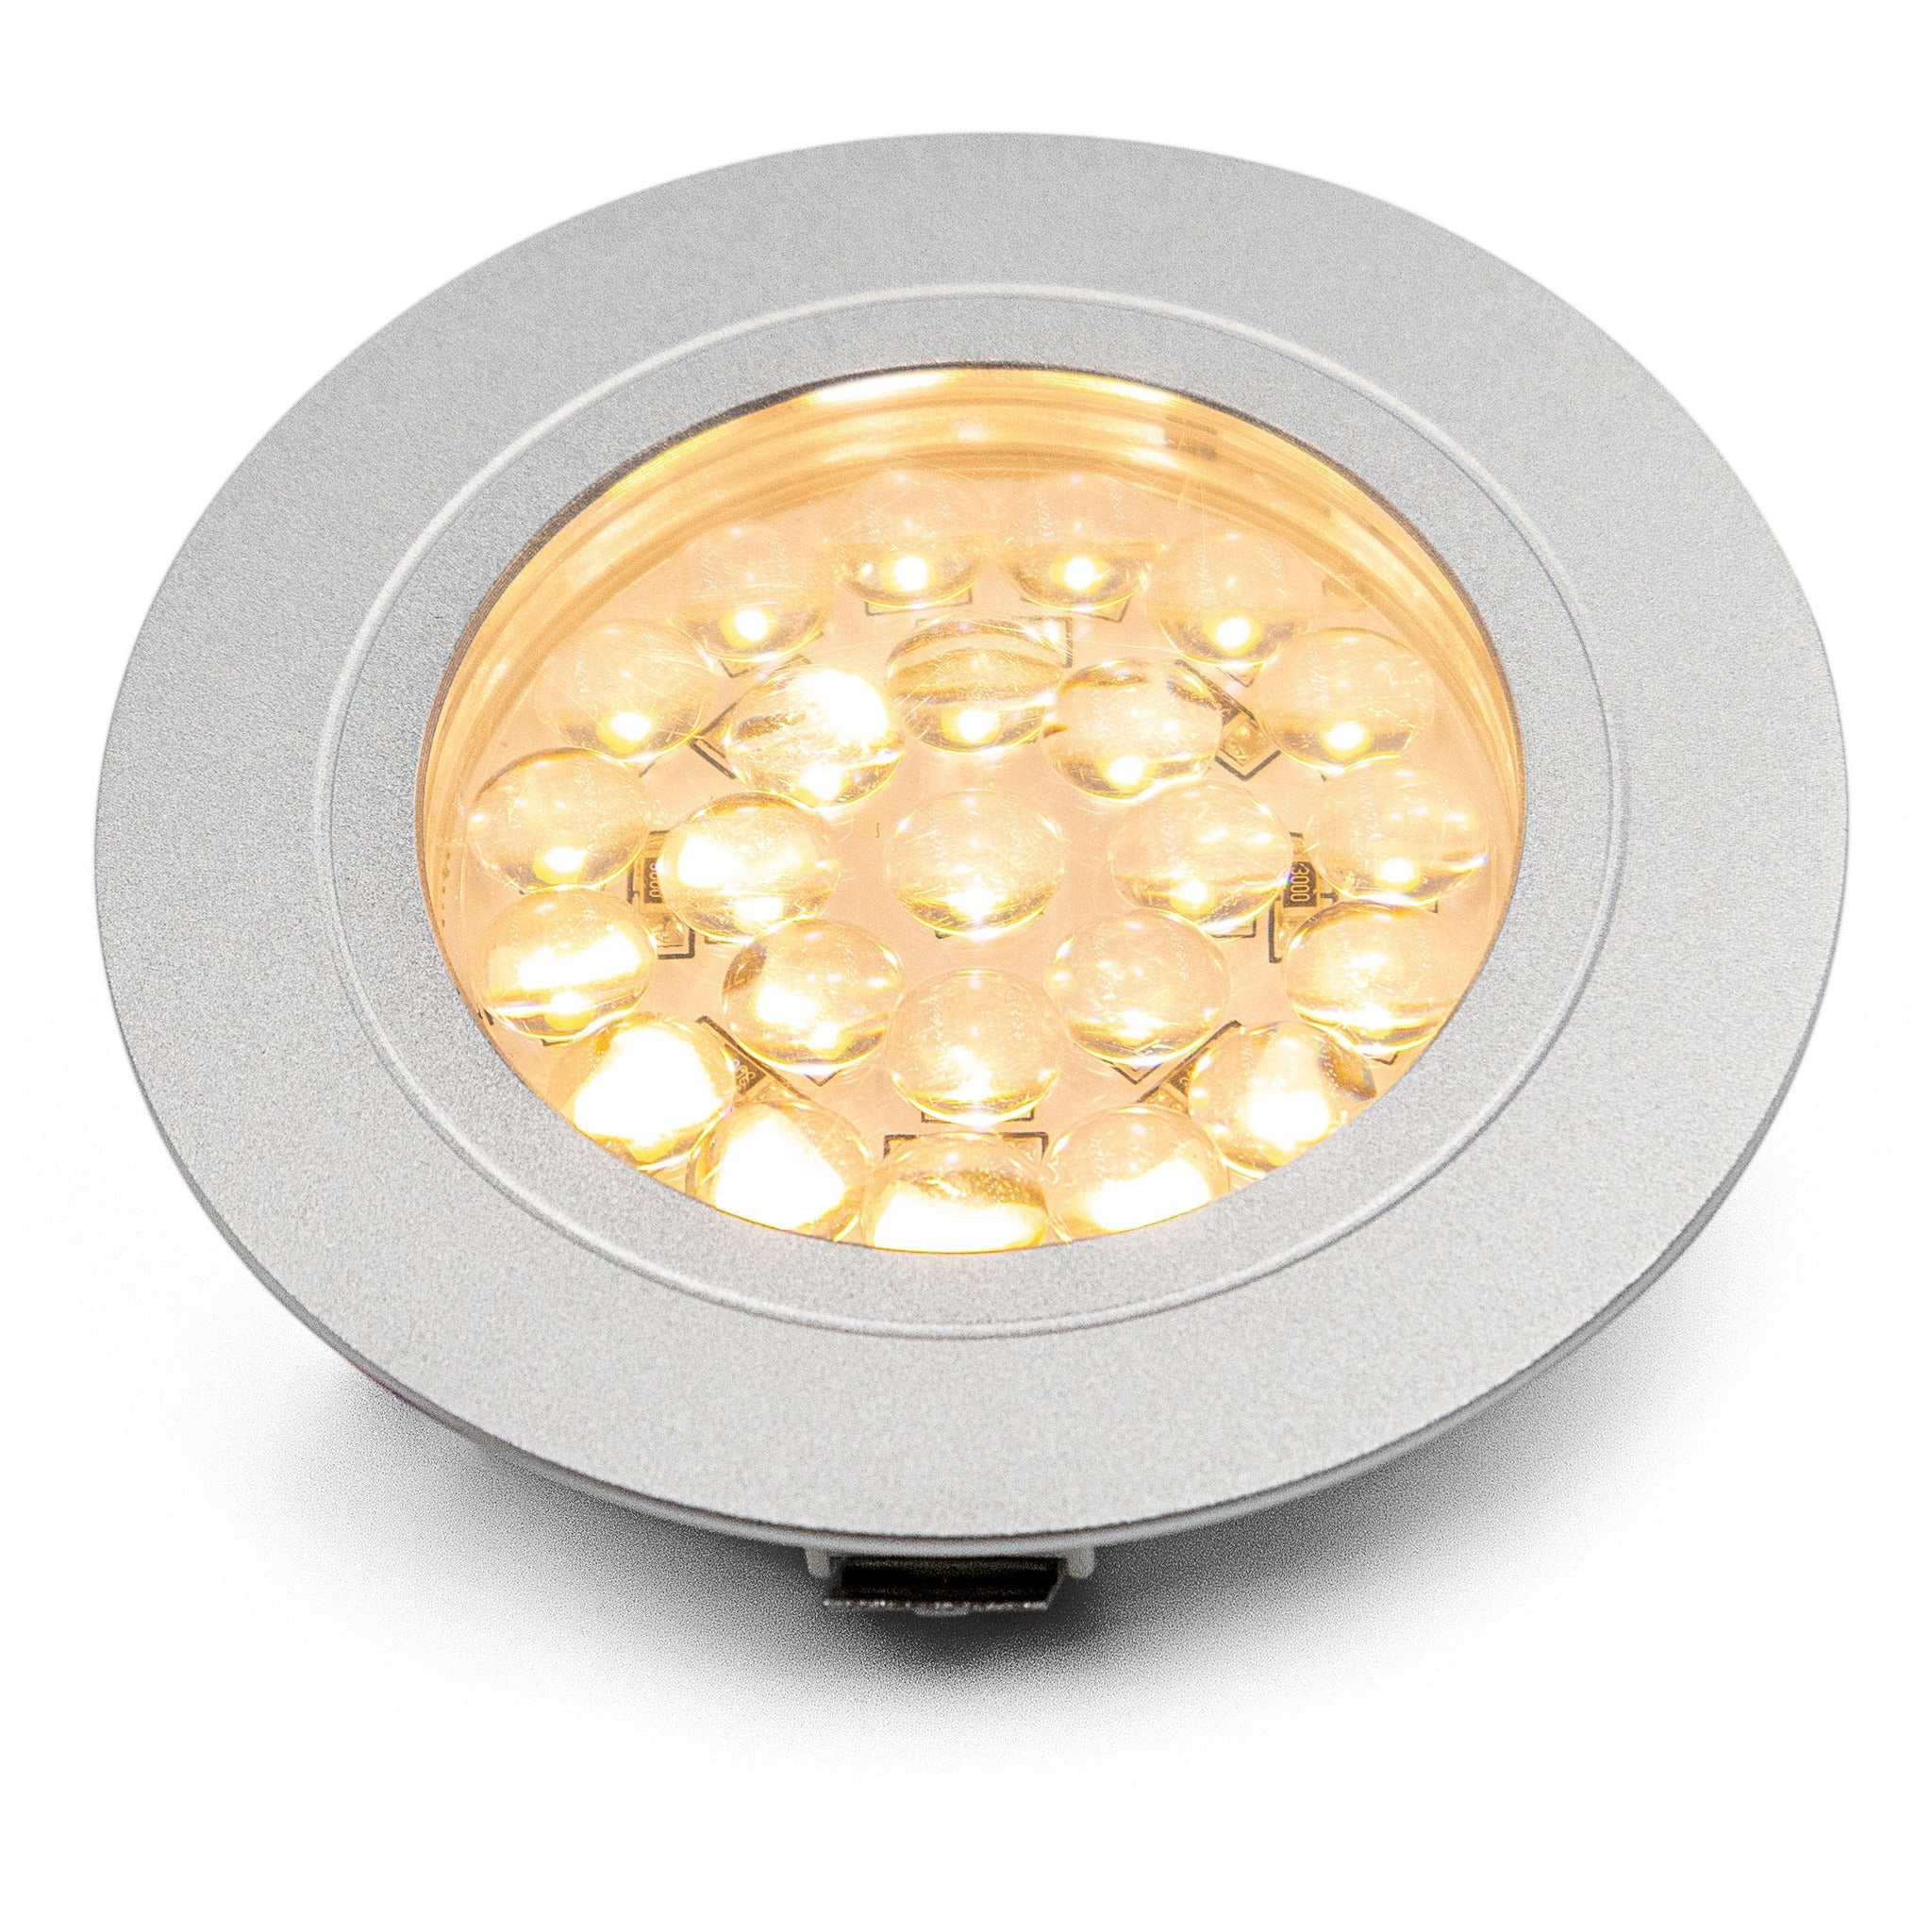 Silver 2W 24 LED Recessed Light - Dimmable, Touch On/Off (Warm White) Kiravans 